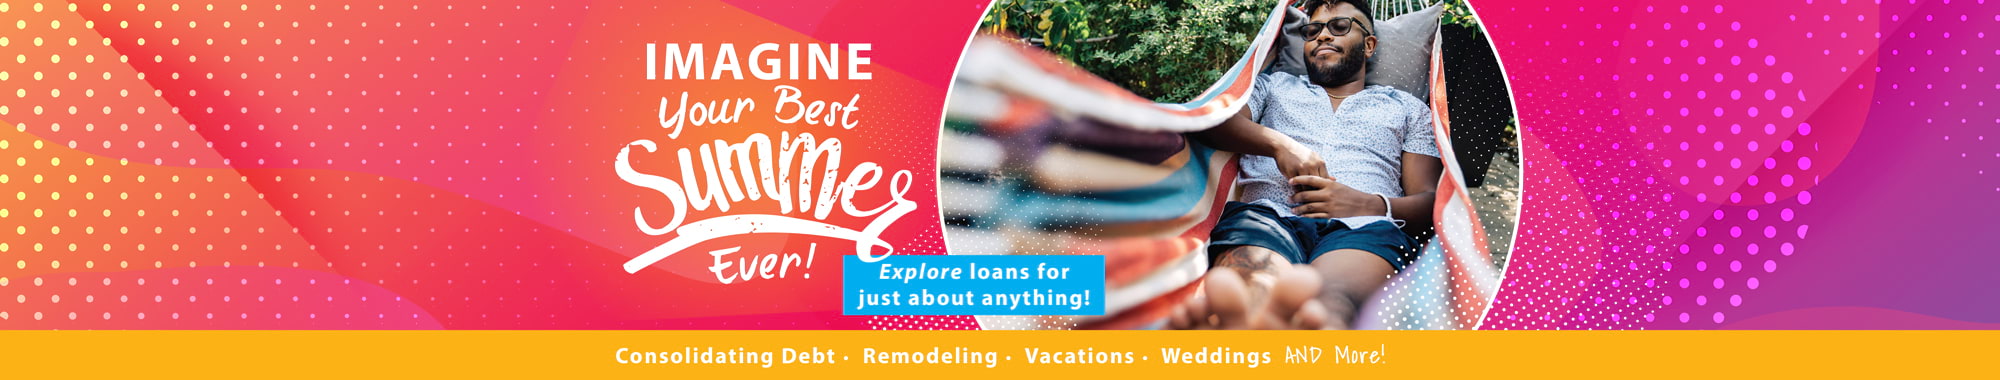 IMAGINE your best summer ever! Explore loans for just about anything!